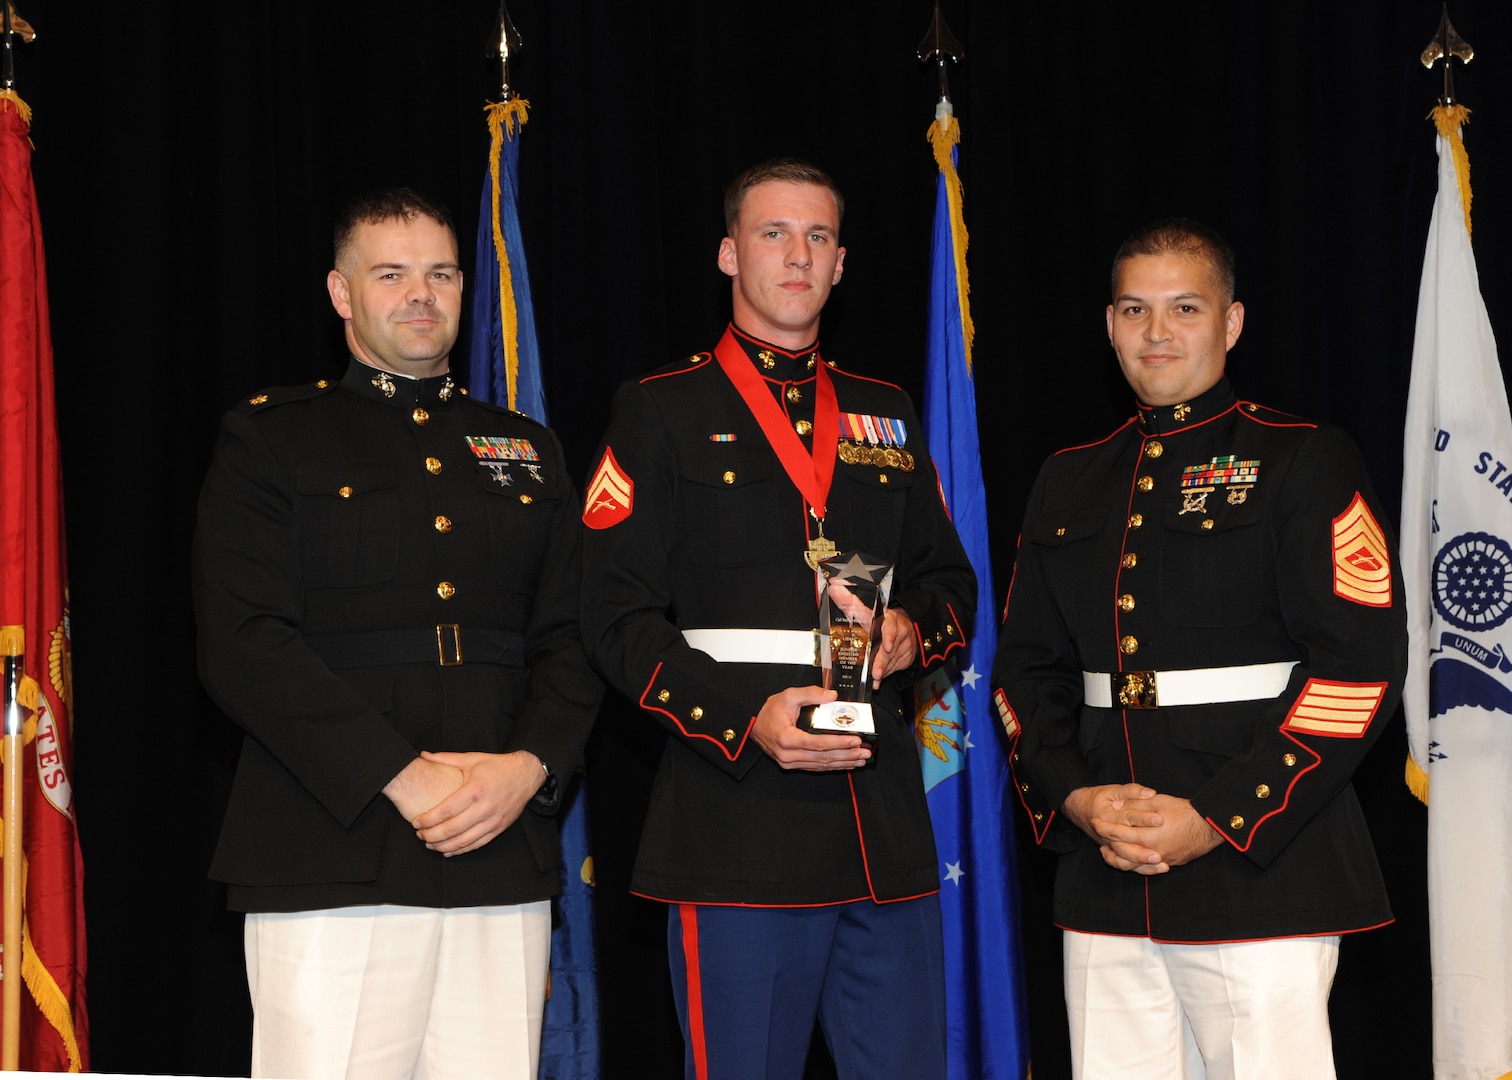 Representing the Marines for award presentations during the Joint Base San Antonio Annual Awards Banquet March 29 are Maj. Martin Gale, left, and Master Sgt. David Villareal, right.  Cpl. Taylor Decicco, center, from Marine Detachment JBSA-Lackland, received the Junior Enlisted Member of the Year Award. (U.S. Air Force photo by Melissa Peterson)